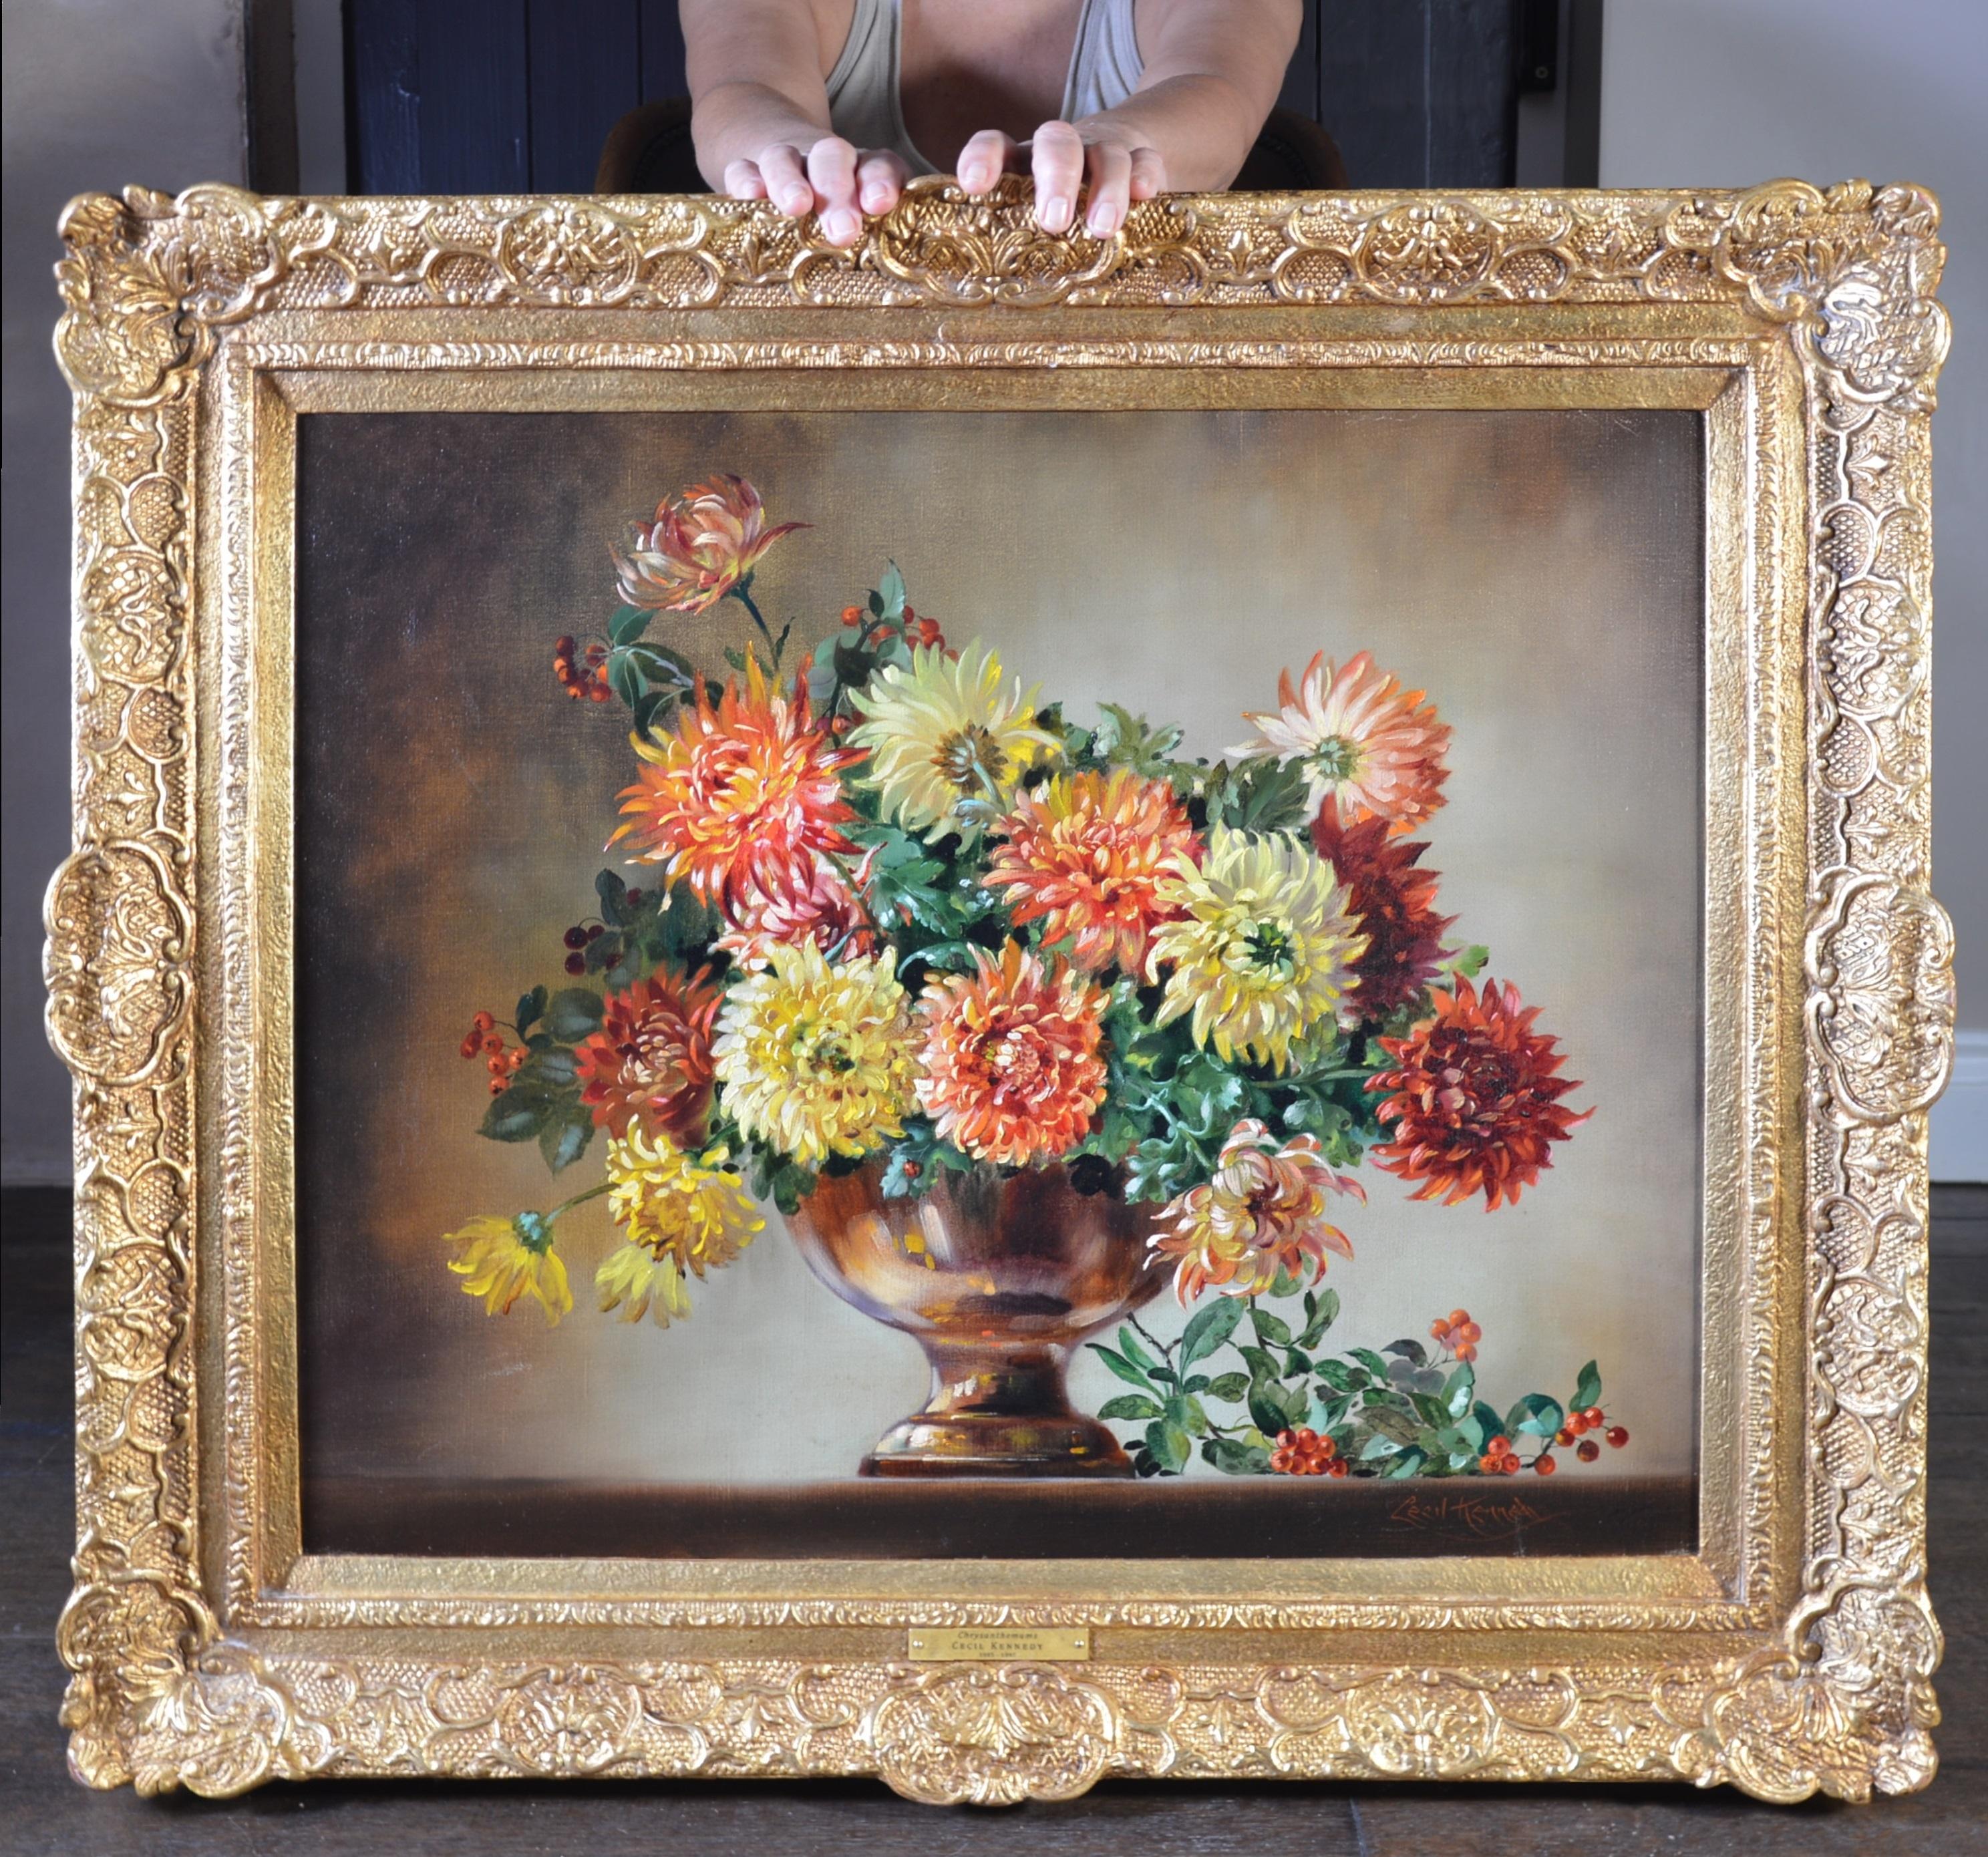 Cecil Kennedy Animal Painting - Chrysanthemums - Floral Still Life Oil Painting with Bee & Ladybird 